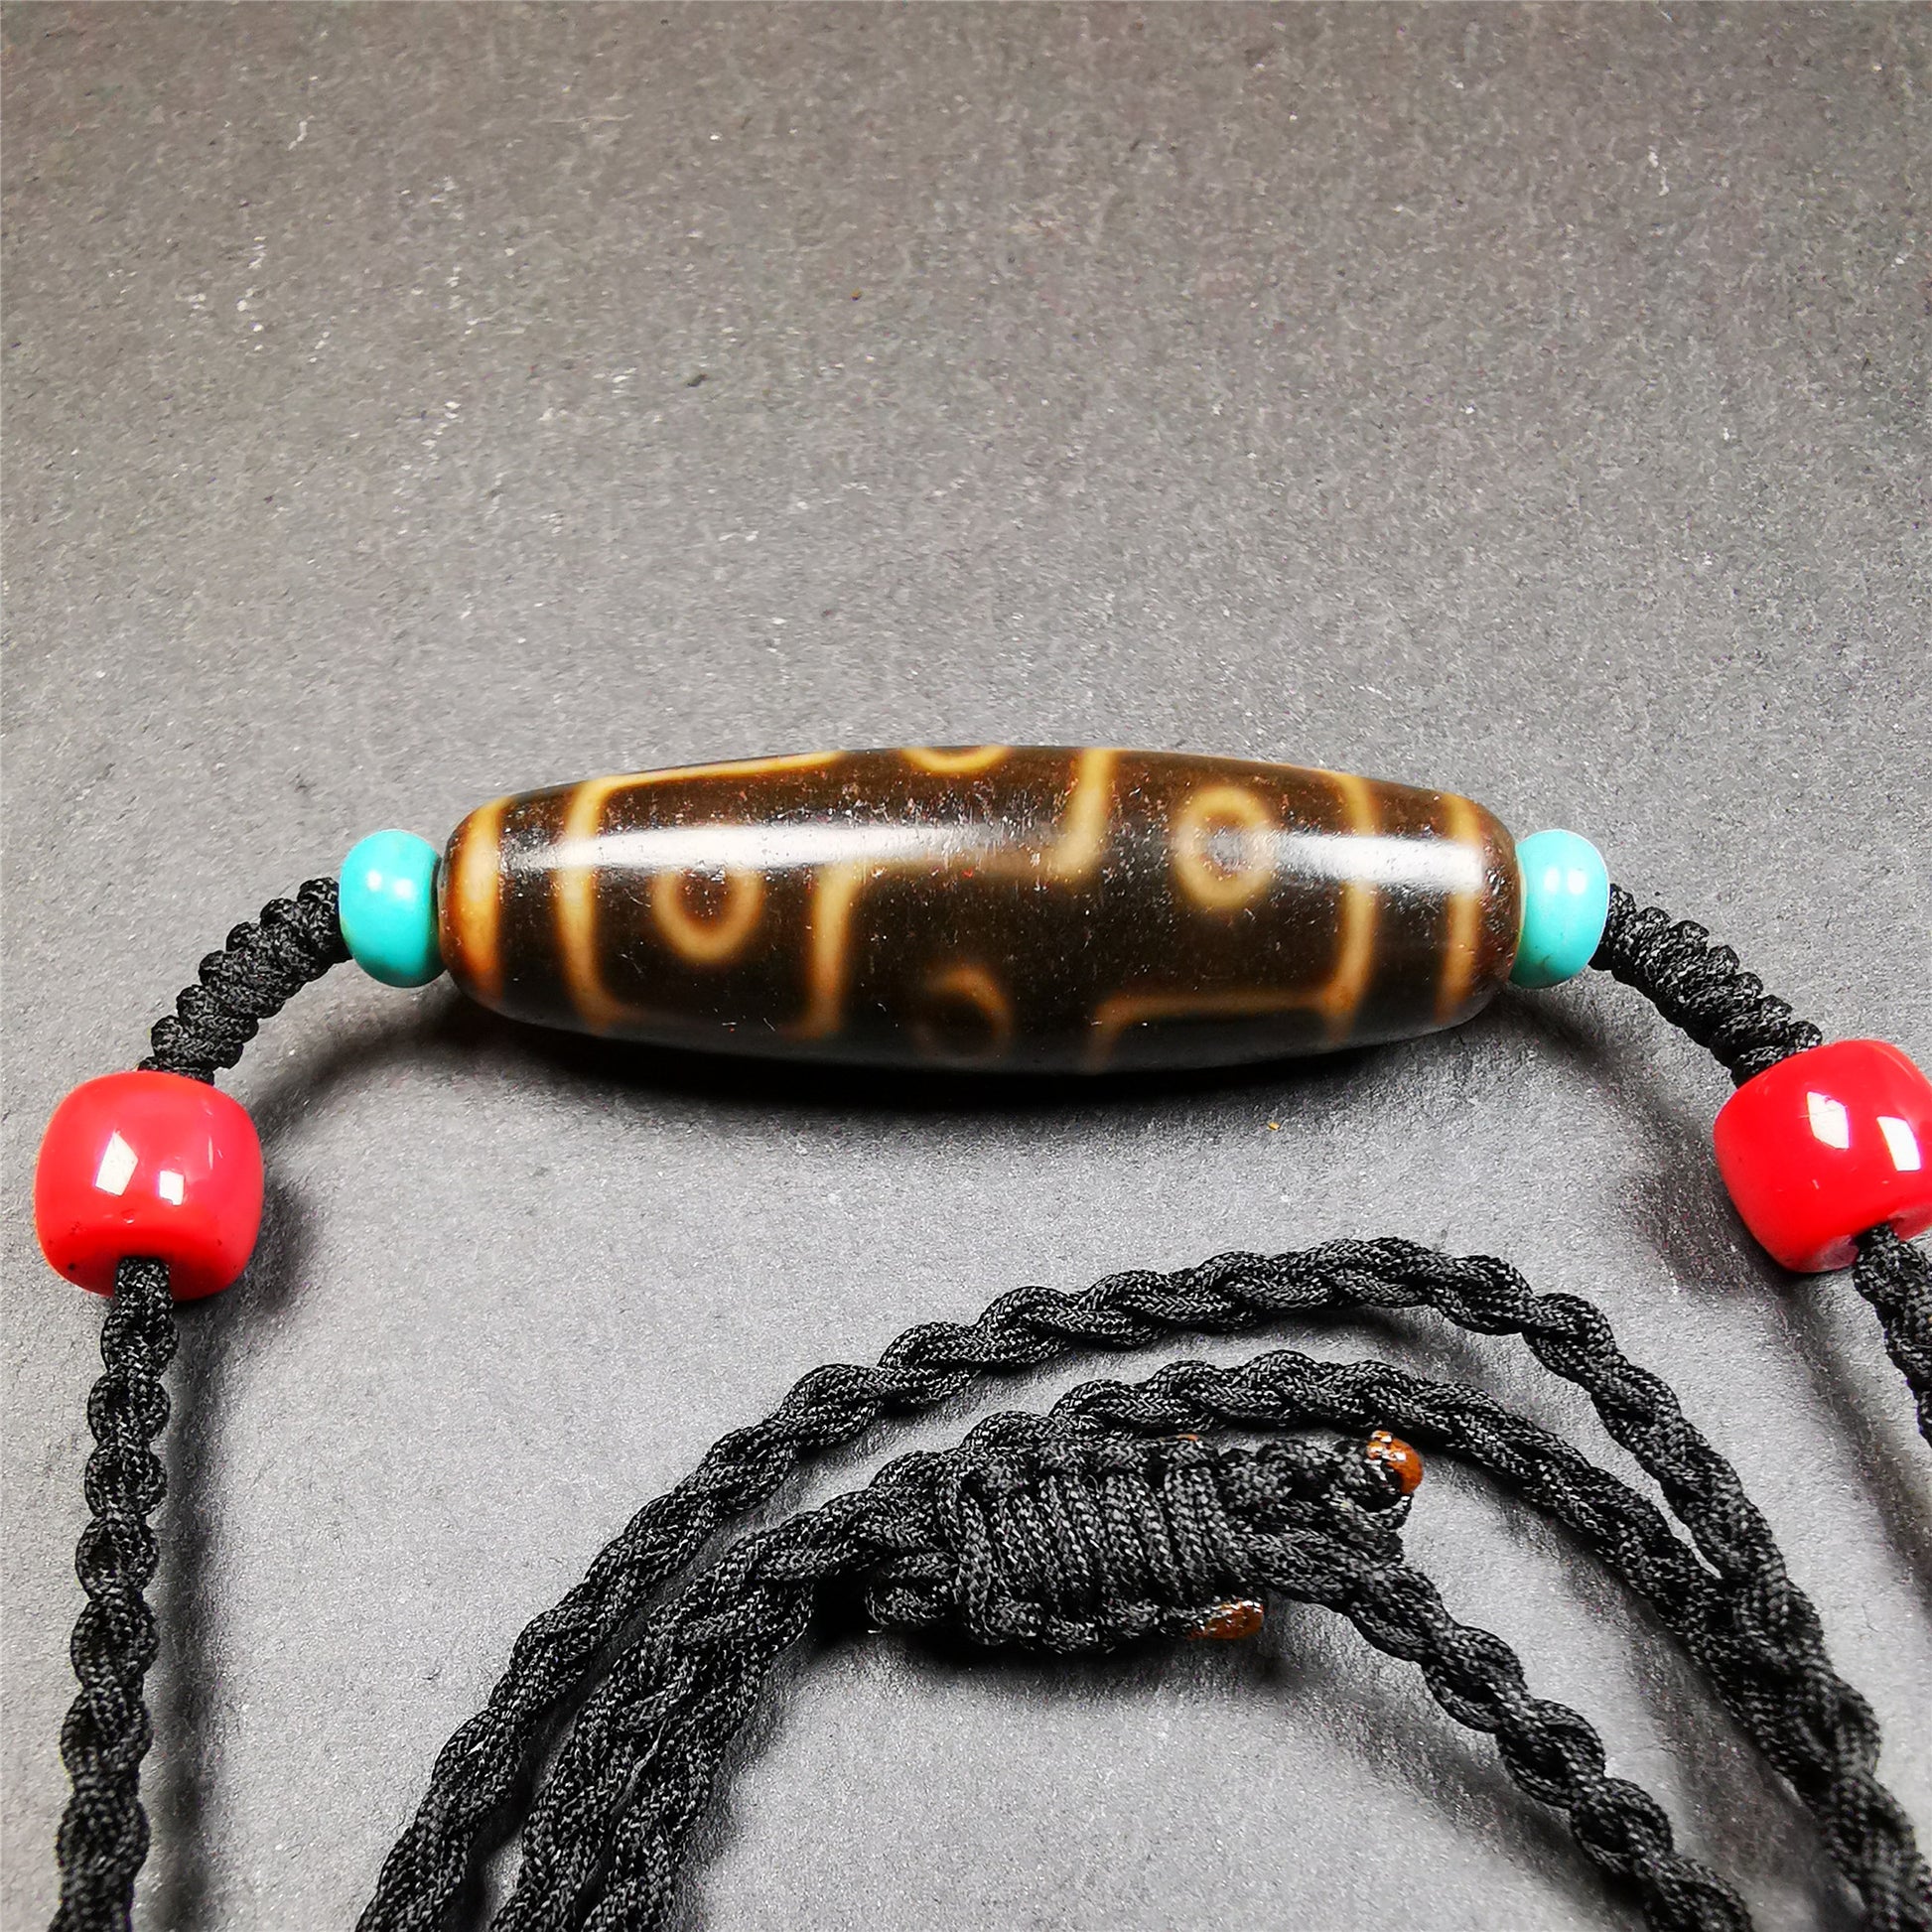 This 9 eyes dzi bead was collected from gerze Tibet,about 50 years old. The necklace was hand-woven by Tibetans from Baiyu County, the main bead is a brown color 9 eyes dzi, paired with 2 turquoise beads and 2 red agate beads.